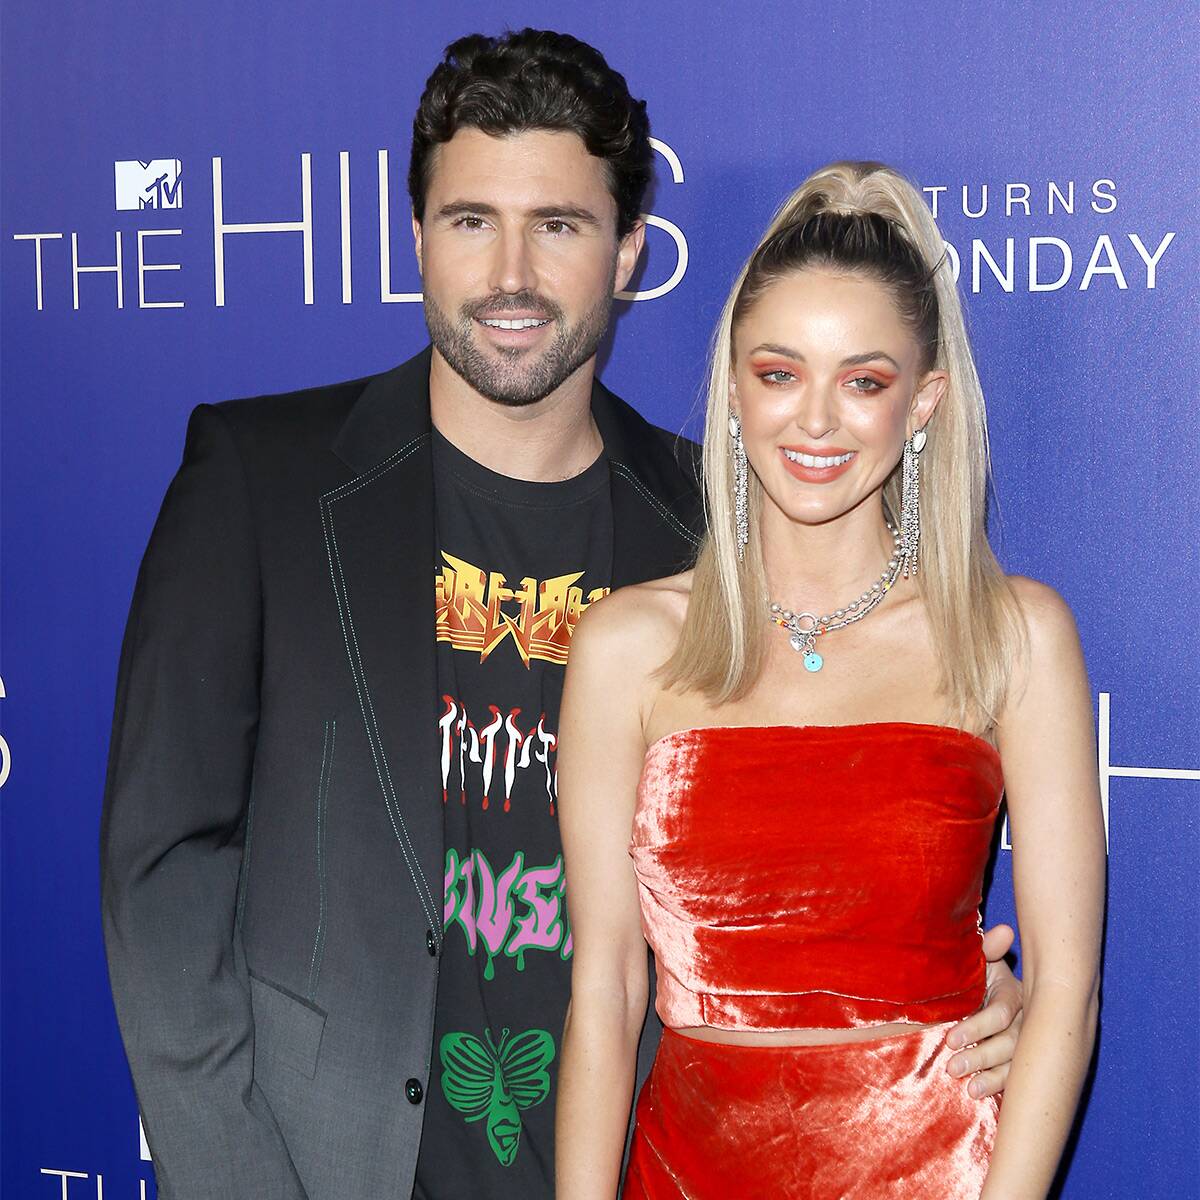 Brody Jenner Meets Kaitlynn Carter's Boyfriend for the First Time in Must-See TV Moment